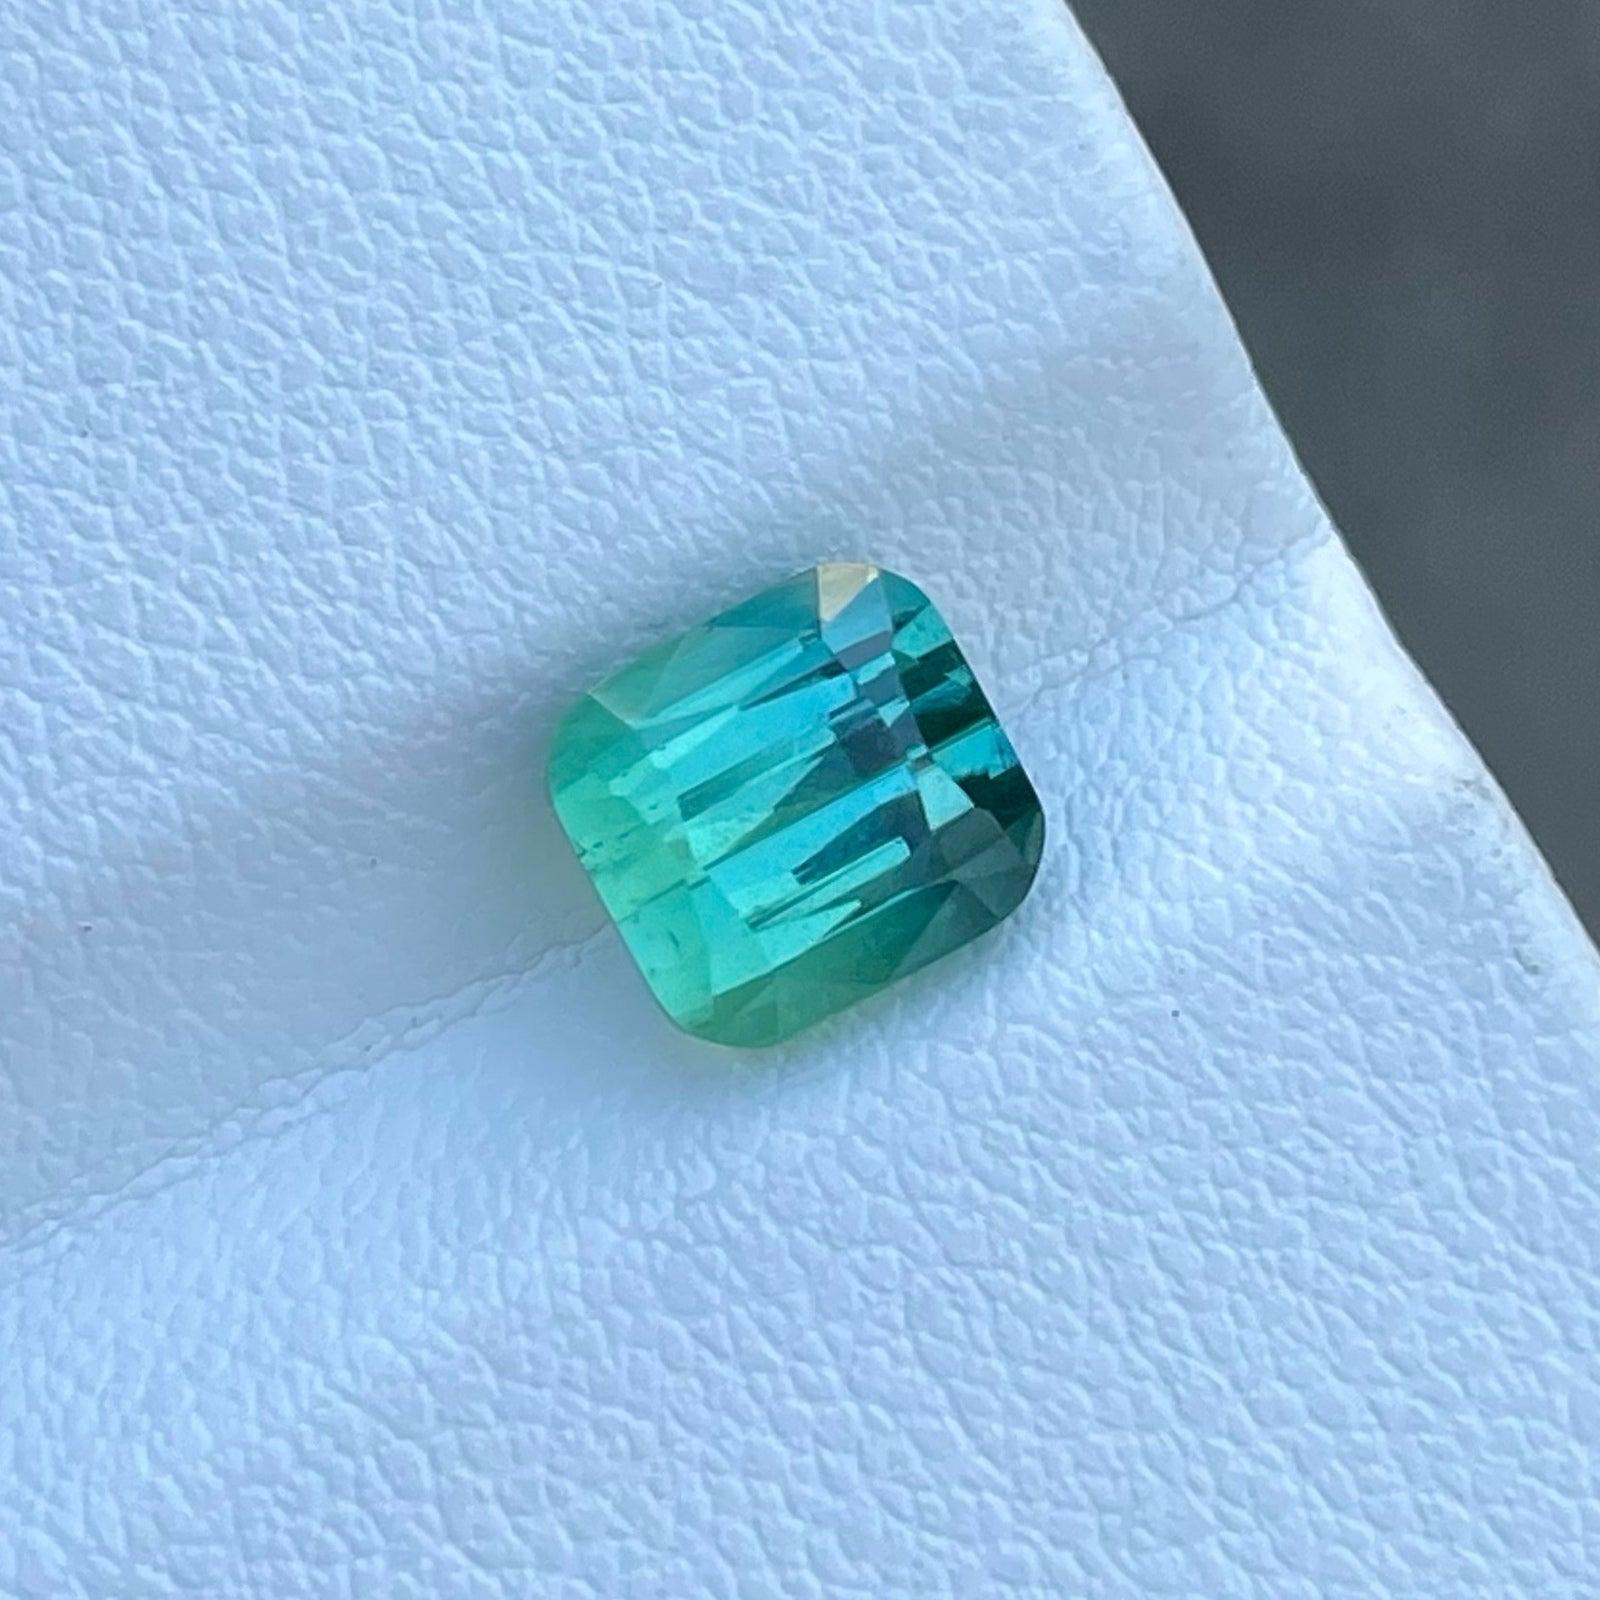 Unique Bicolor Natural Tourmaline Gemstone 2.55 Carats Cushion Cut In New Condition For Sale In Bangkok, TH